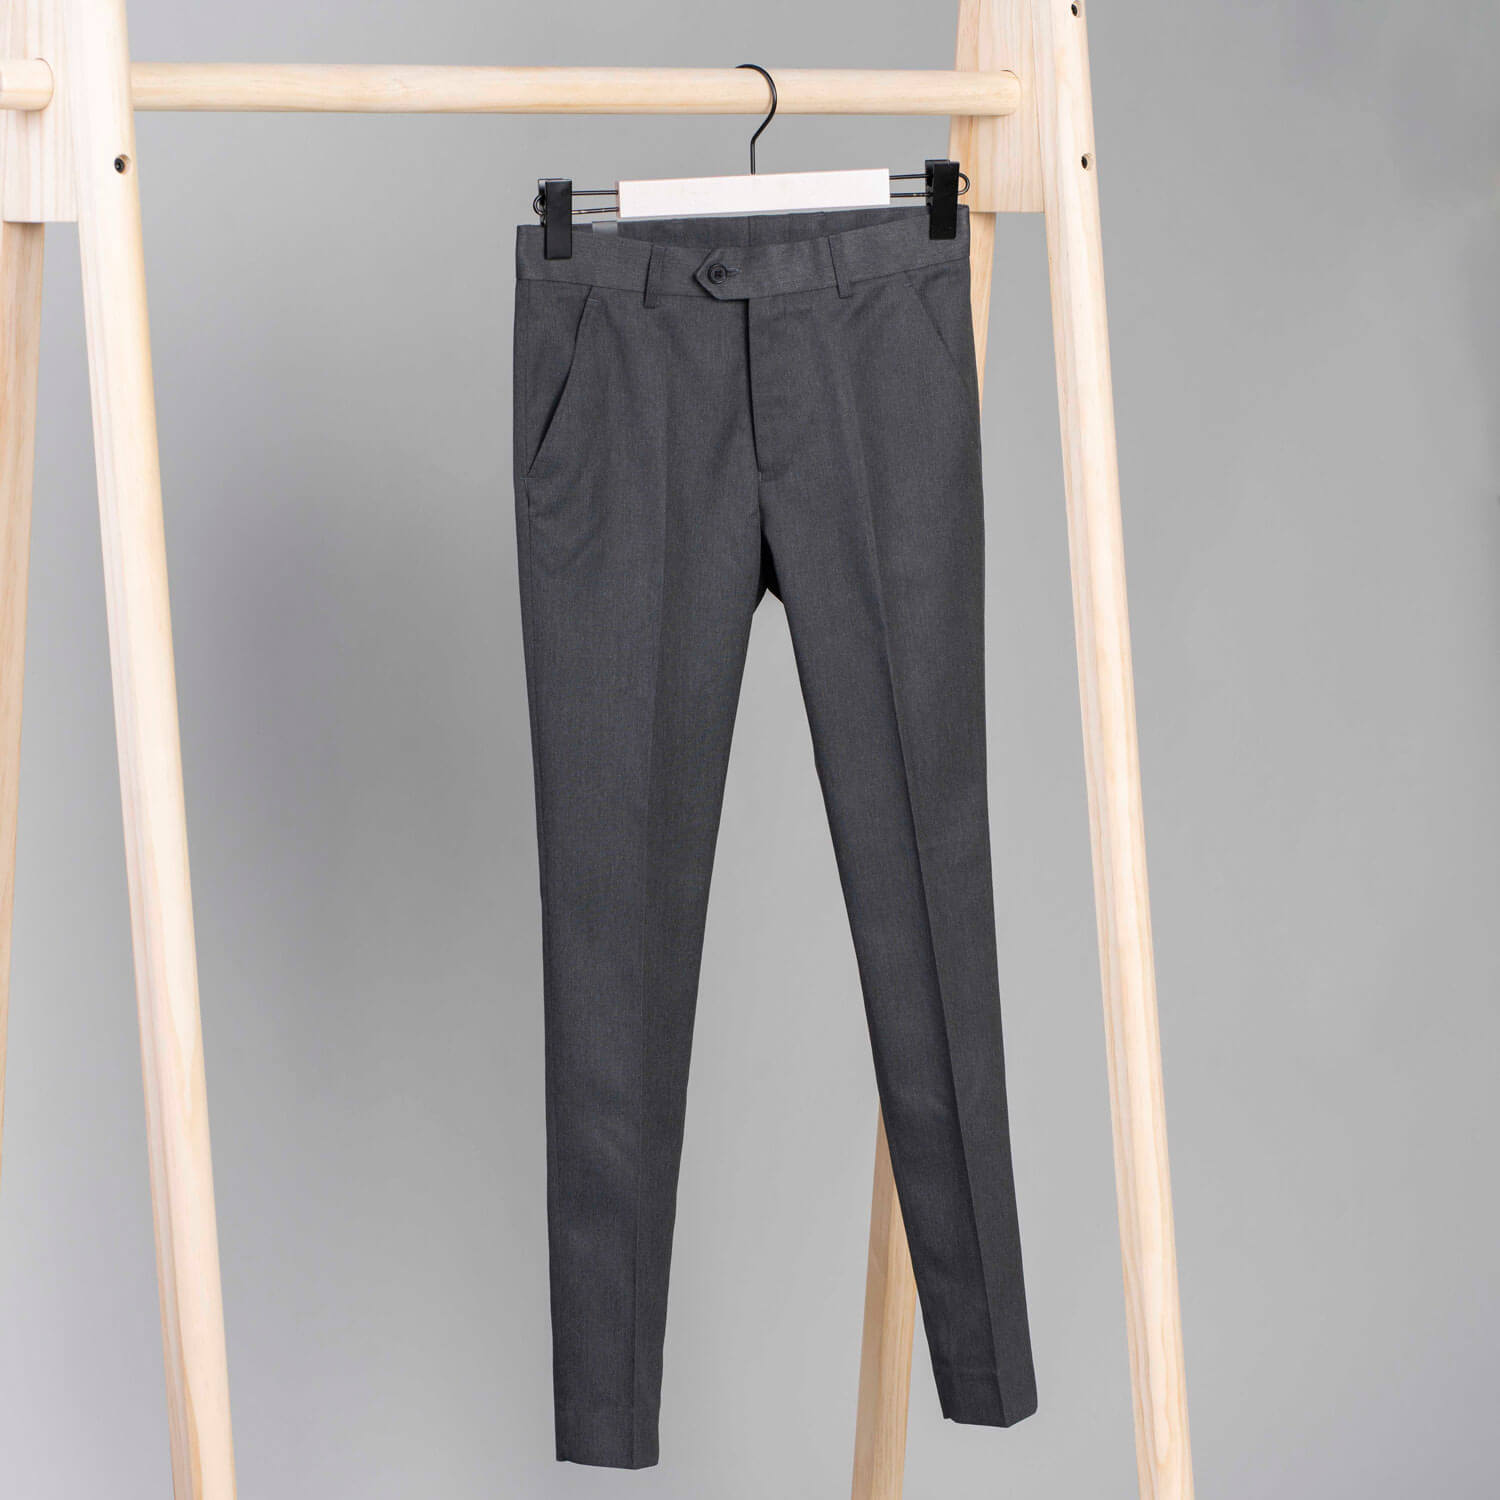 Blue Dot Boys Slimfit Trousers - Grey 1 Shaws Department Stores